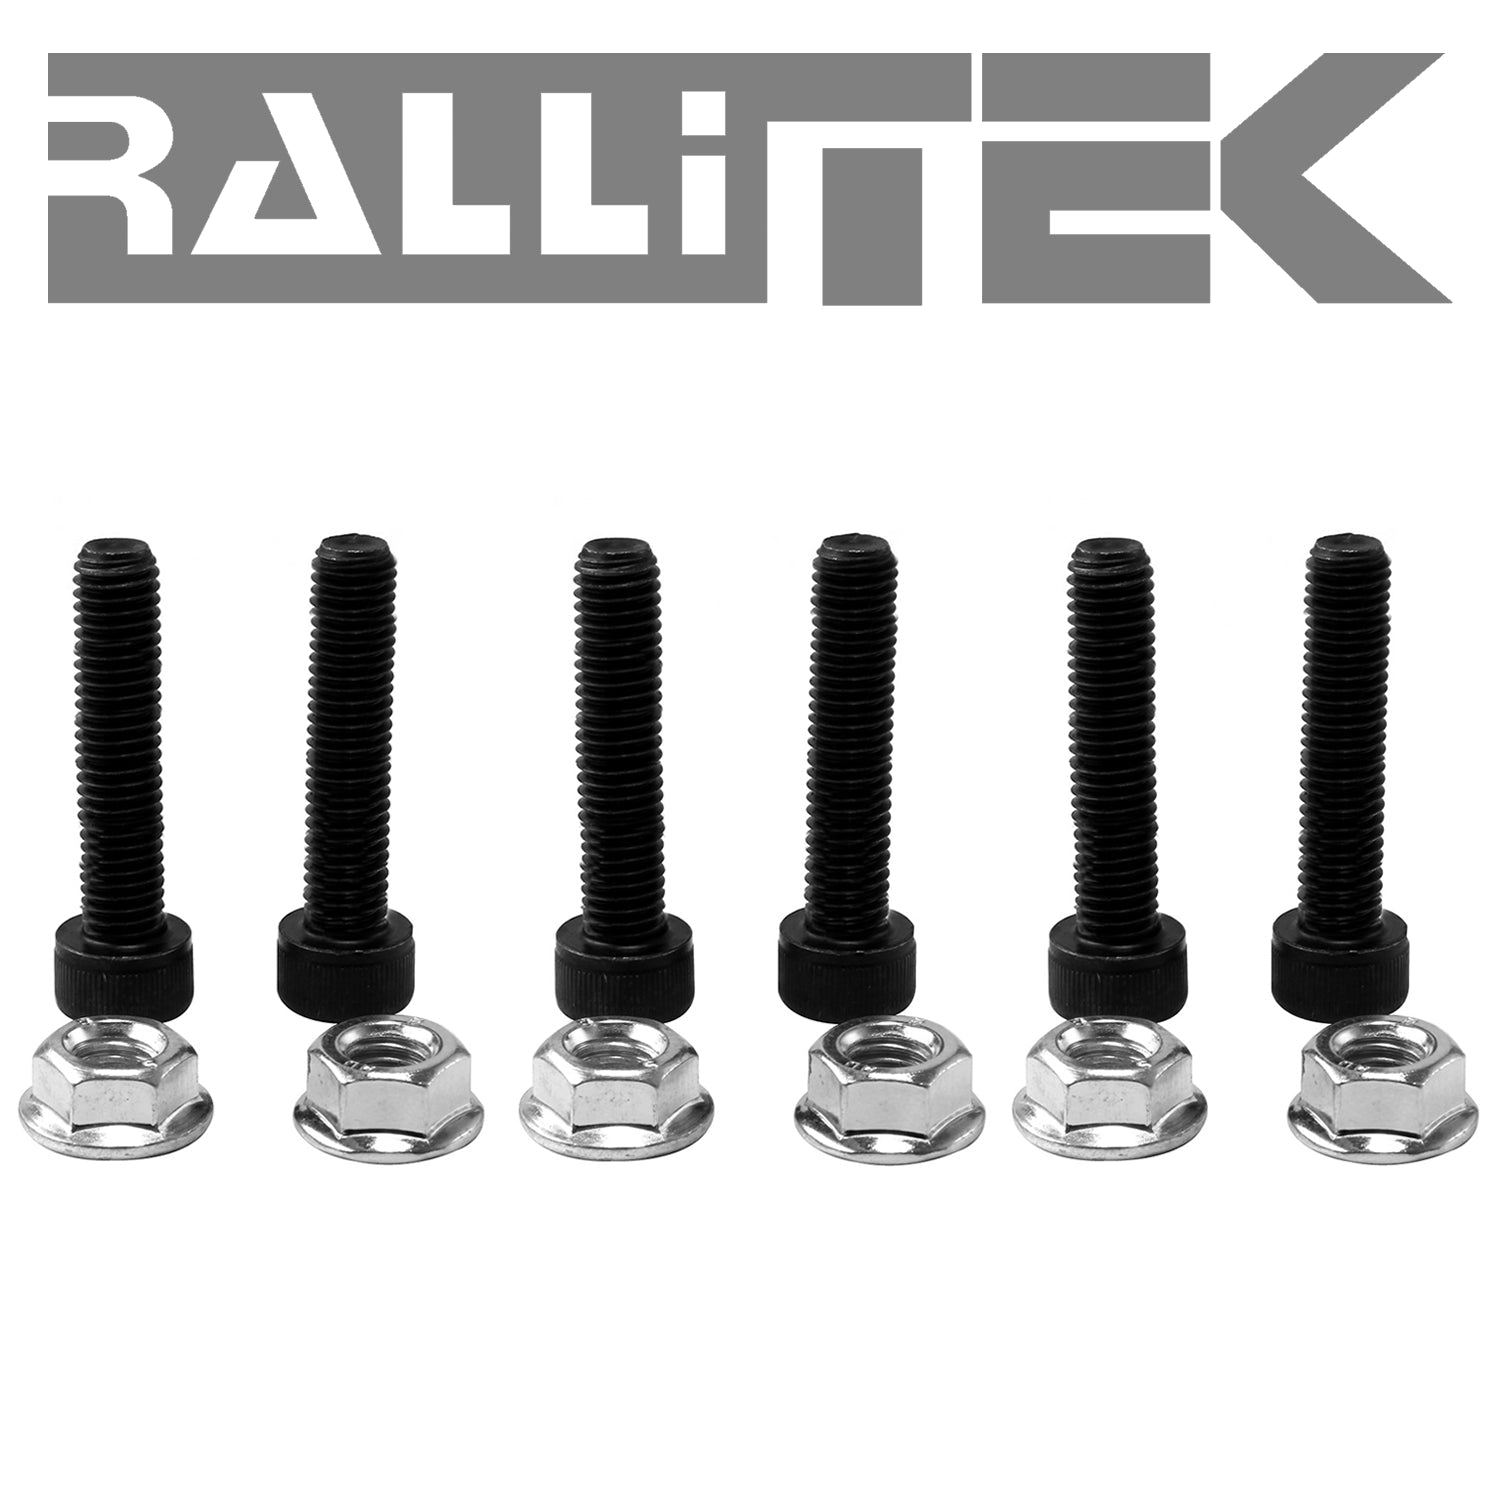 RalliTEK 0.5" Front Lift Kit Spacers - All Impreza 1993-2007 / Legacy 1990-2004 / Outback 2000-2004 / Outback 2010-2018 / More